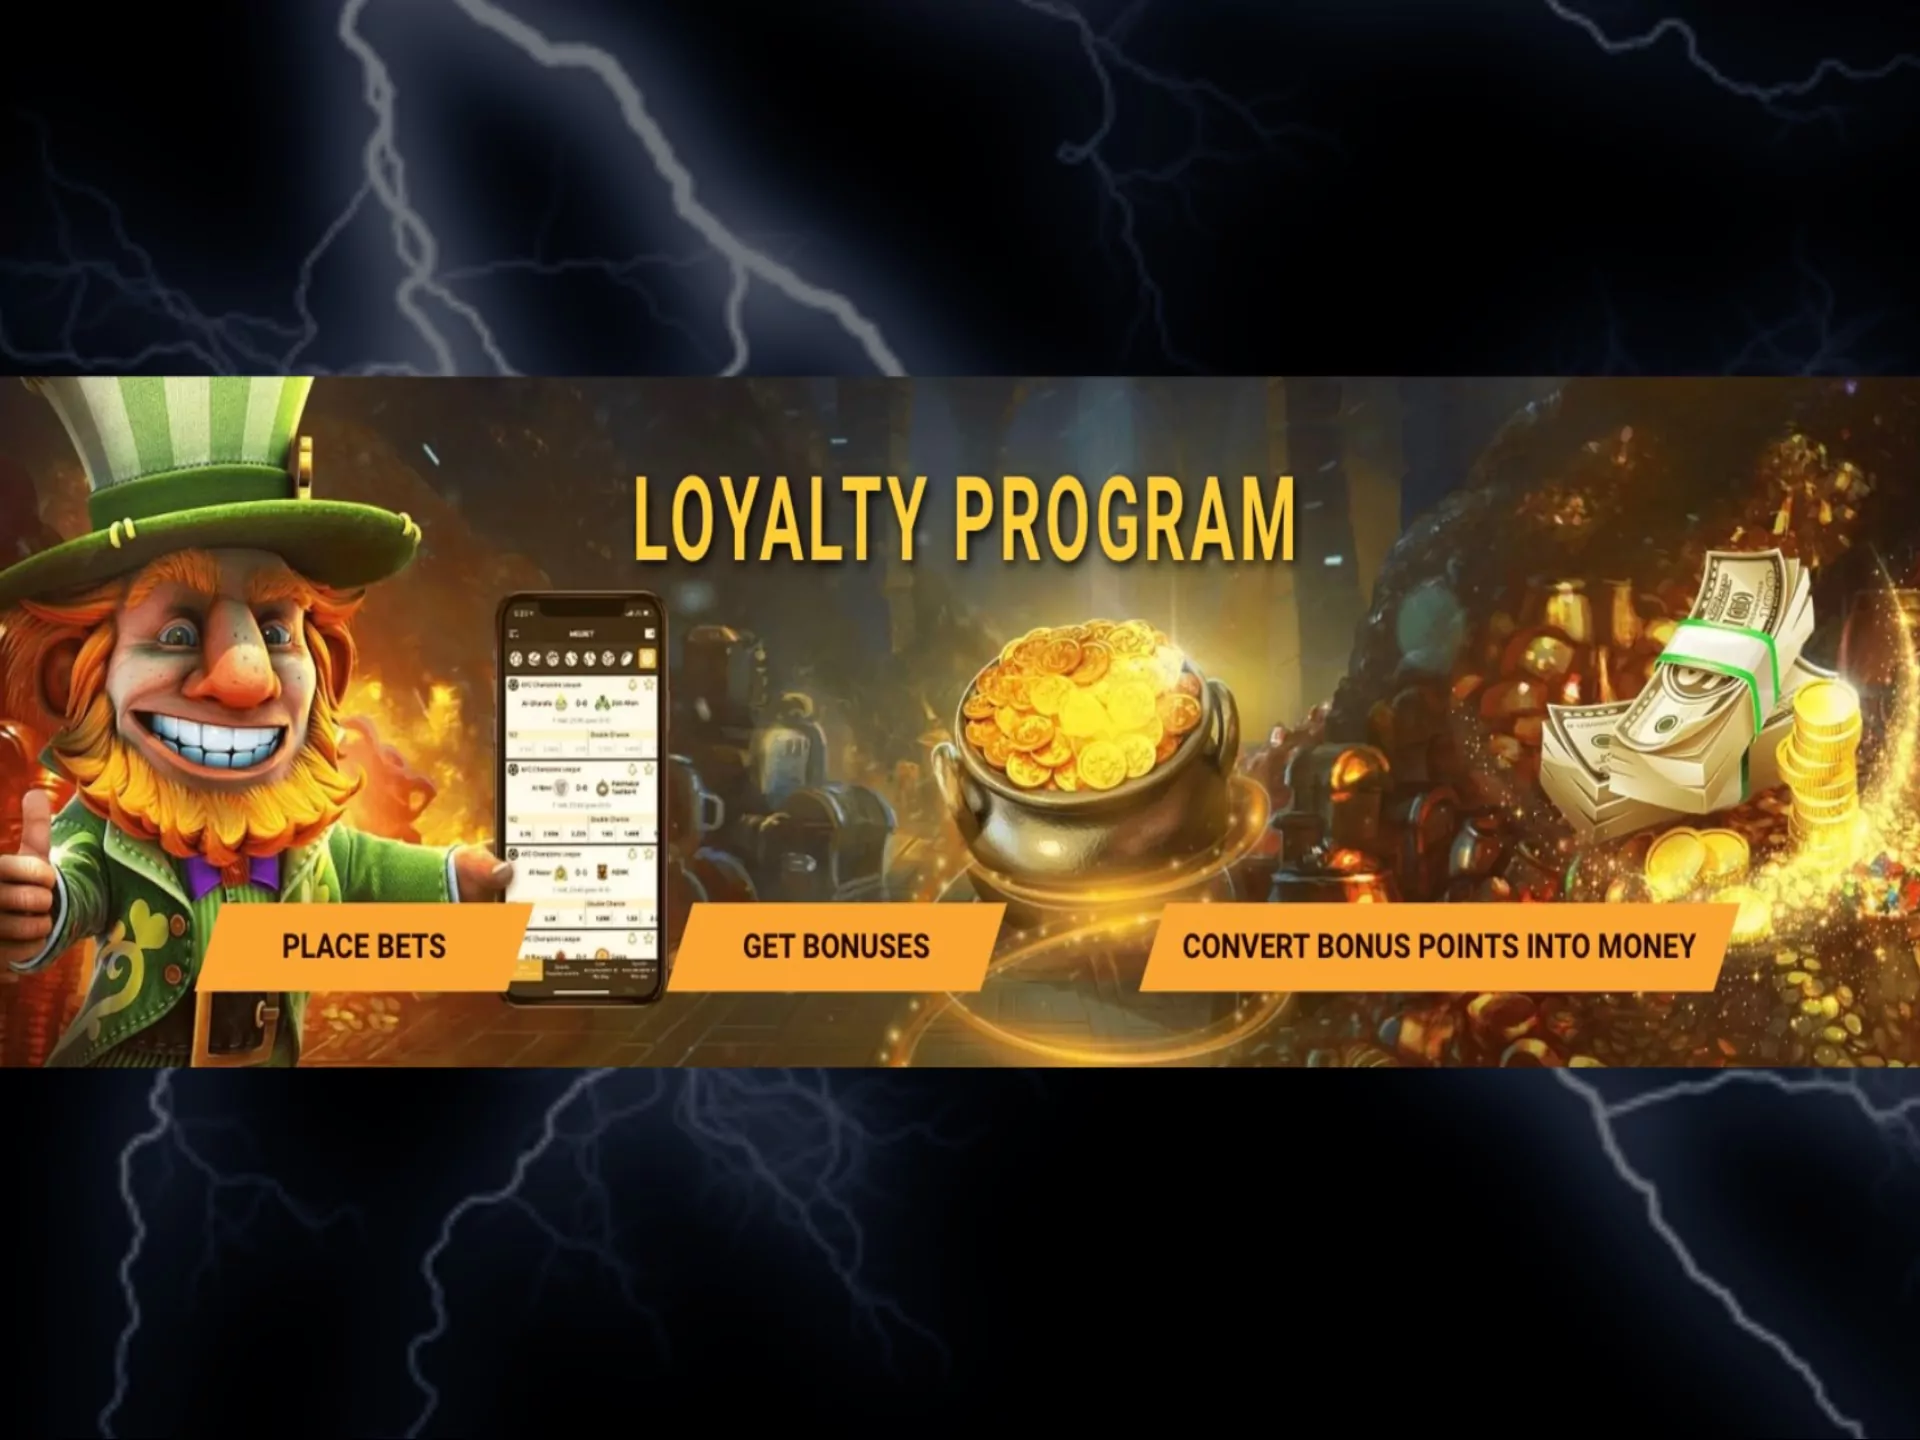 Melbet appreciate loyal players and offers them pleasant bonuses and promos.